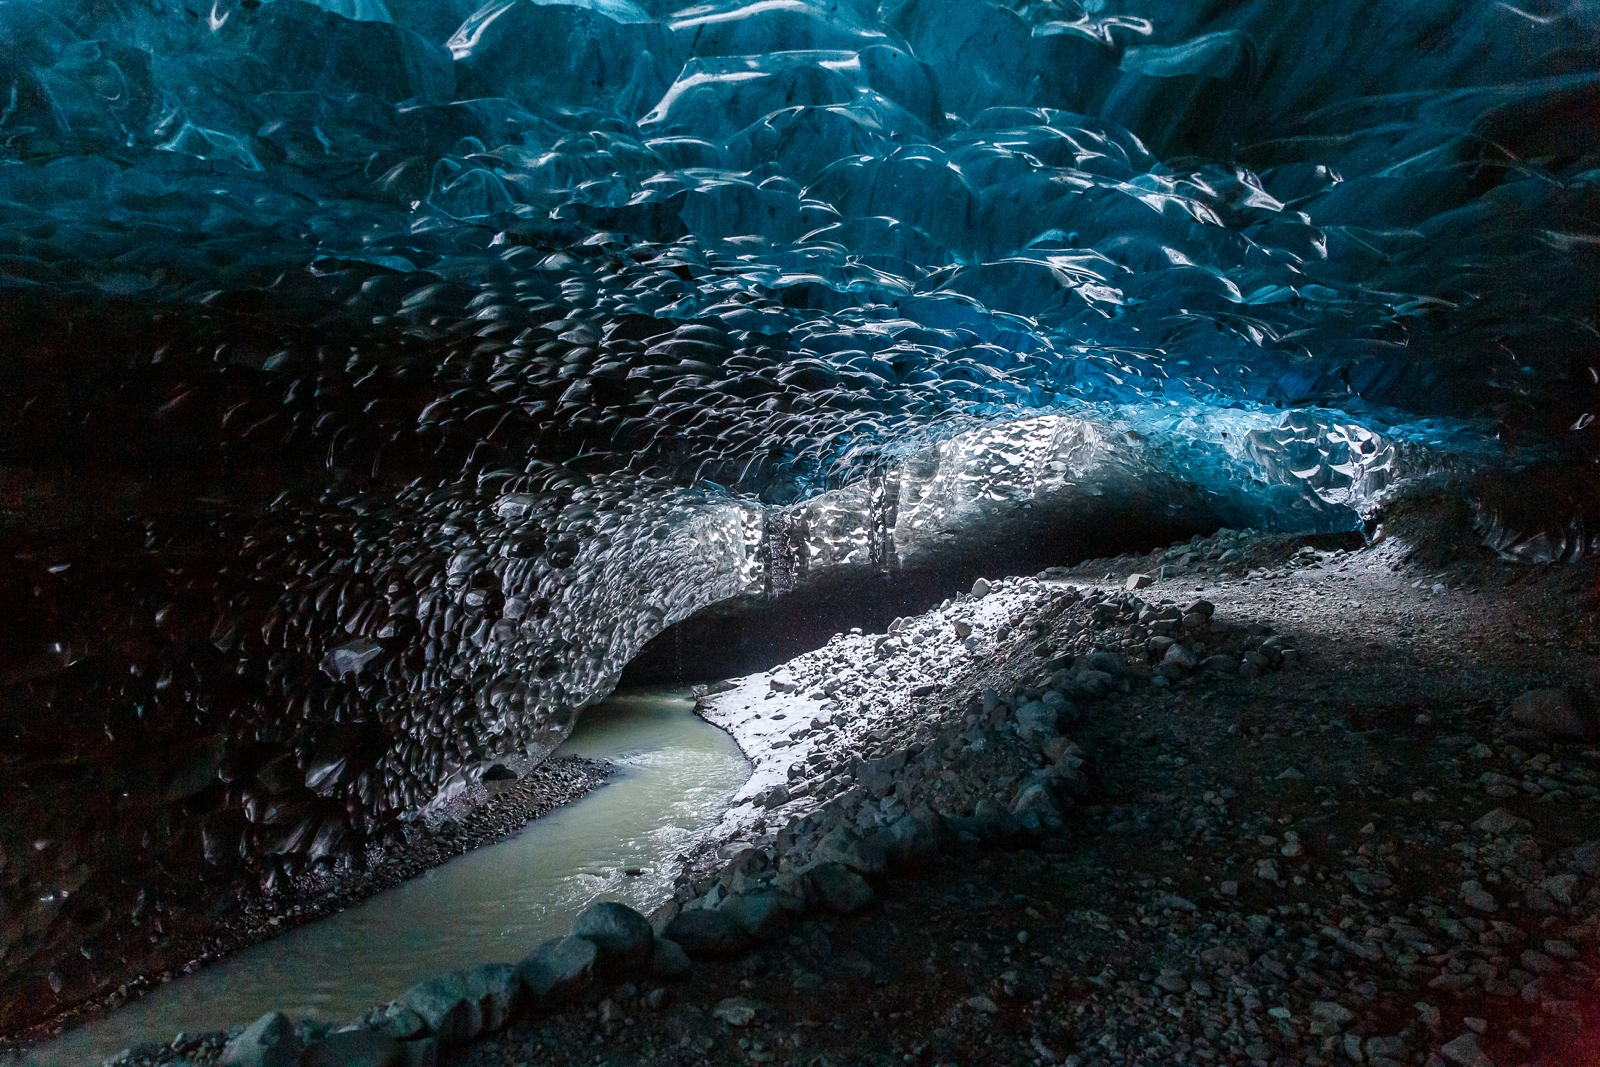 Who wants to elope in this Iceland ice cave?!